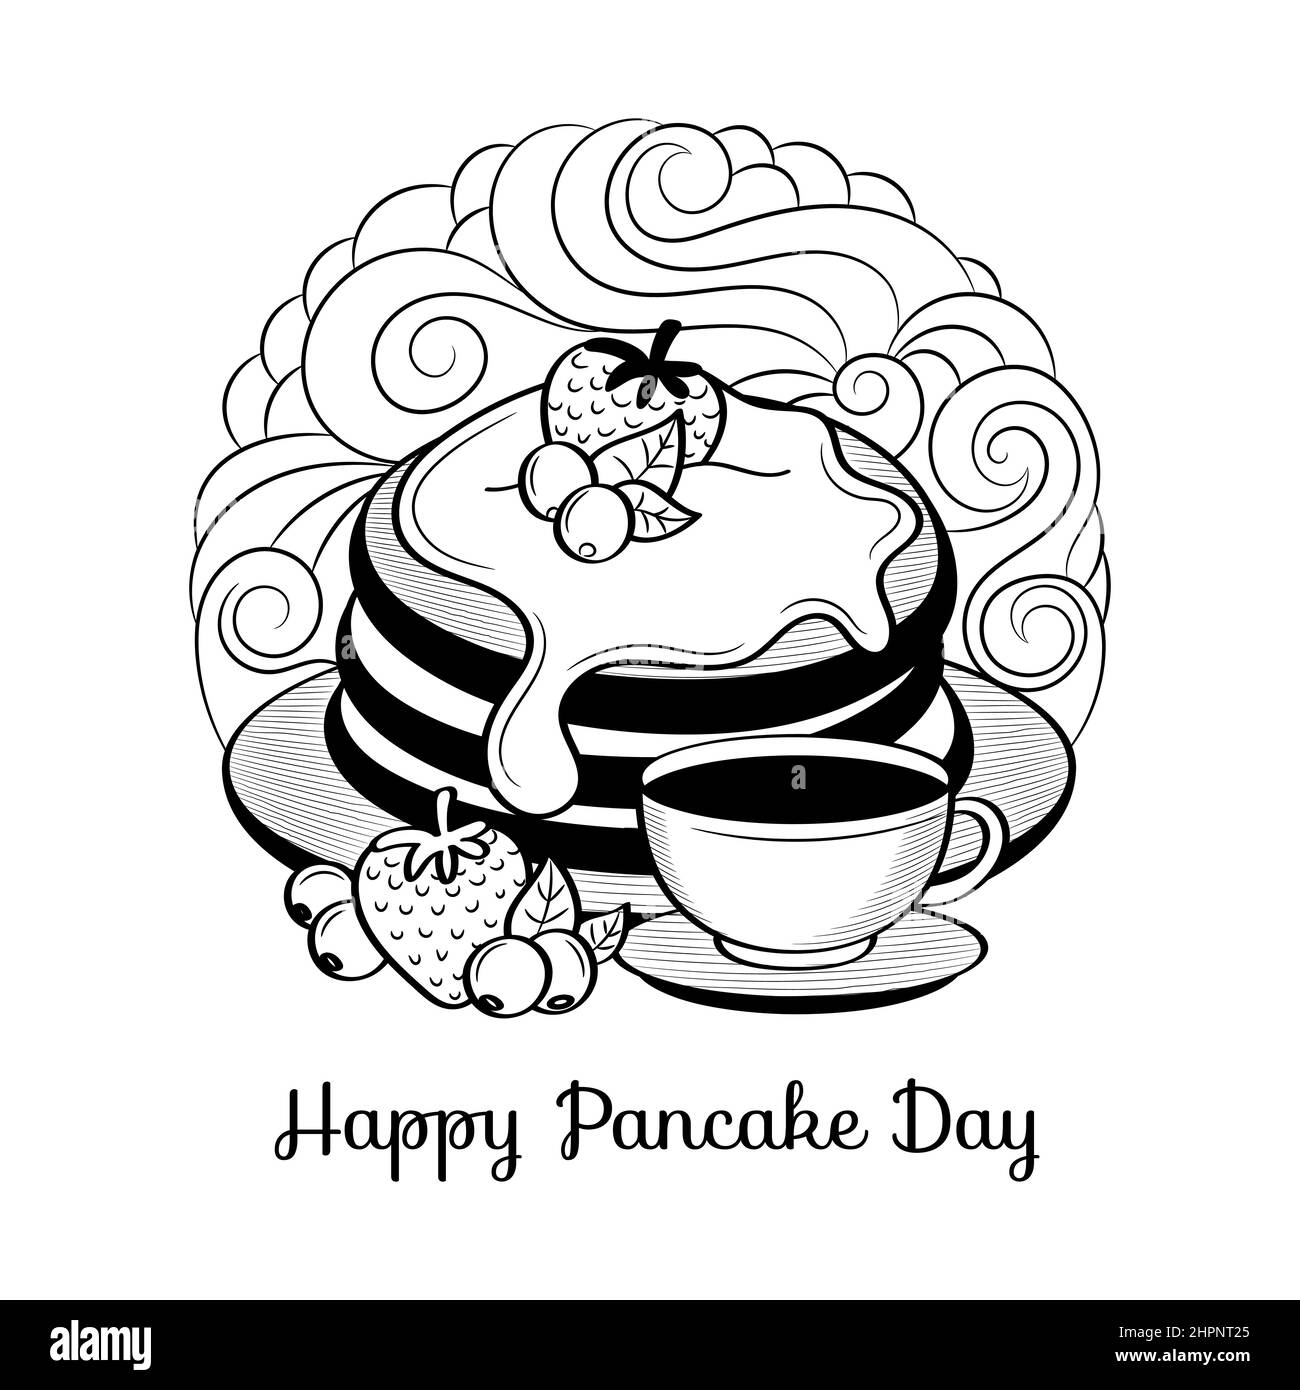 Happy Pancake Day with hand drawn doodle illustration Stock Vector